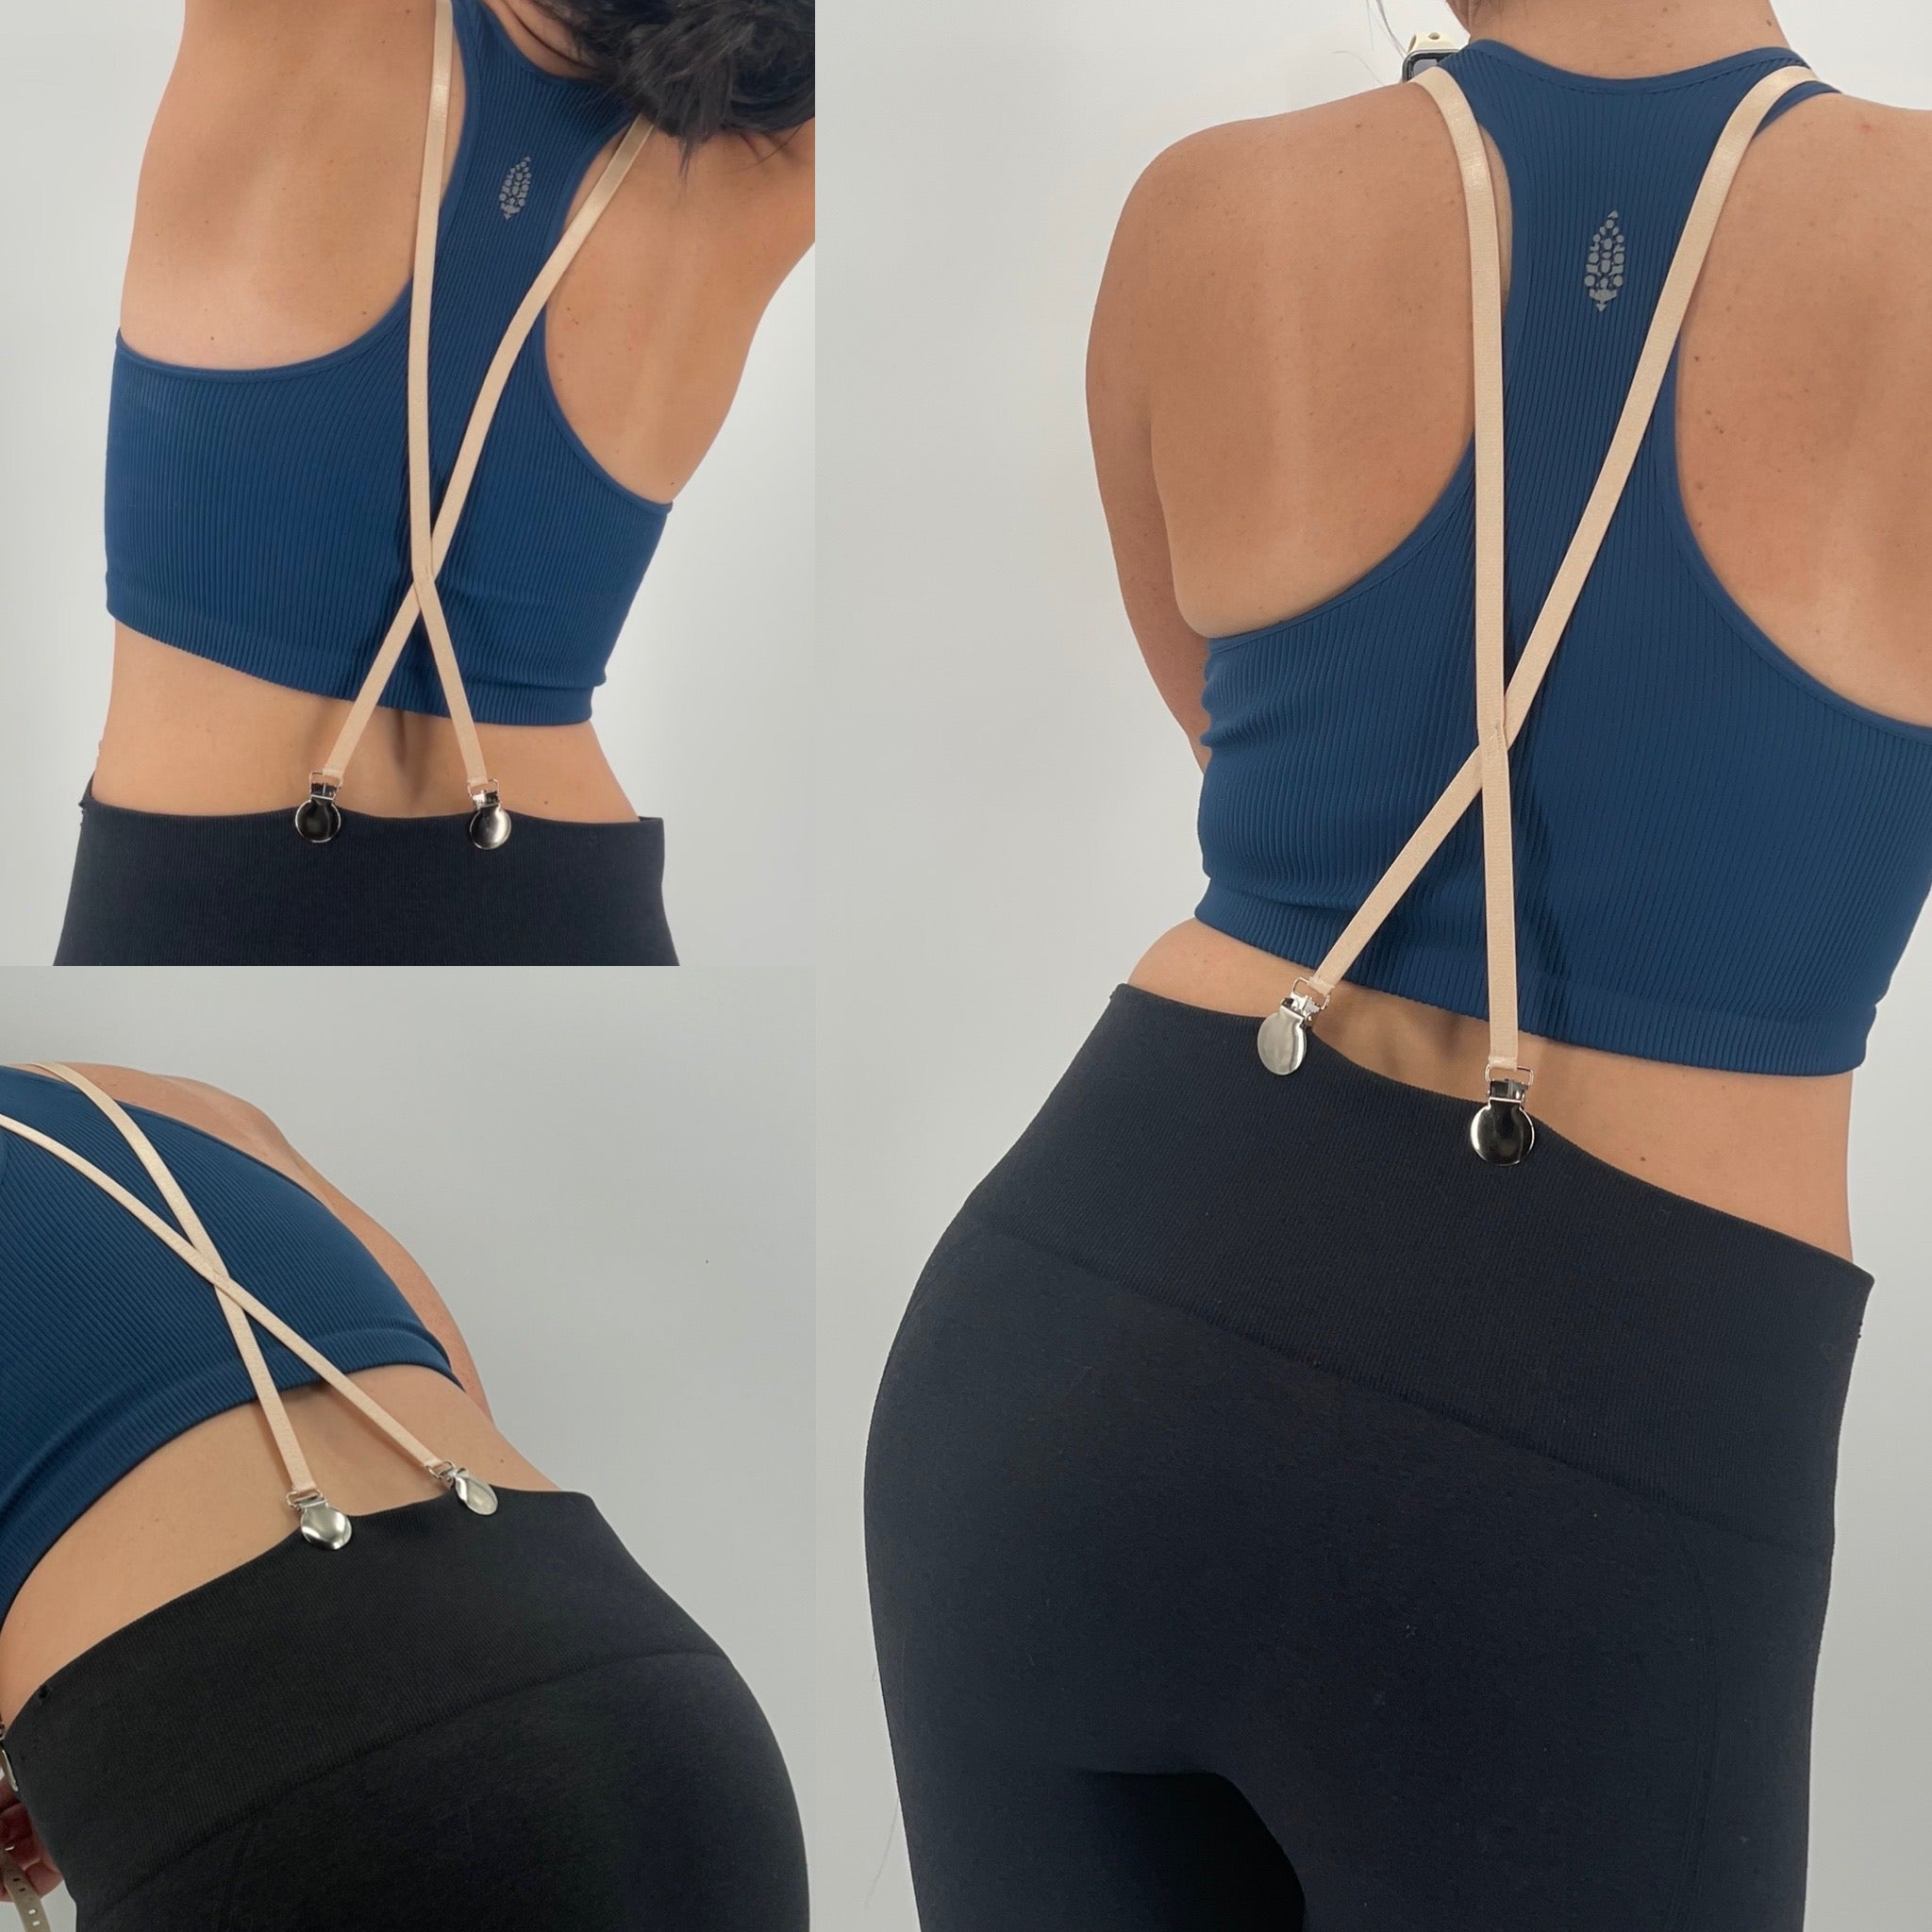 Butt Lifting Women's Undergarment Suspenders for Pants with Belt